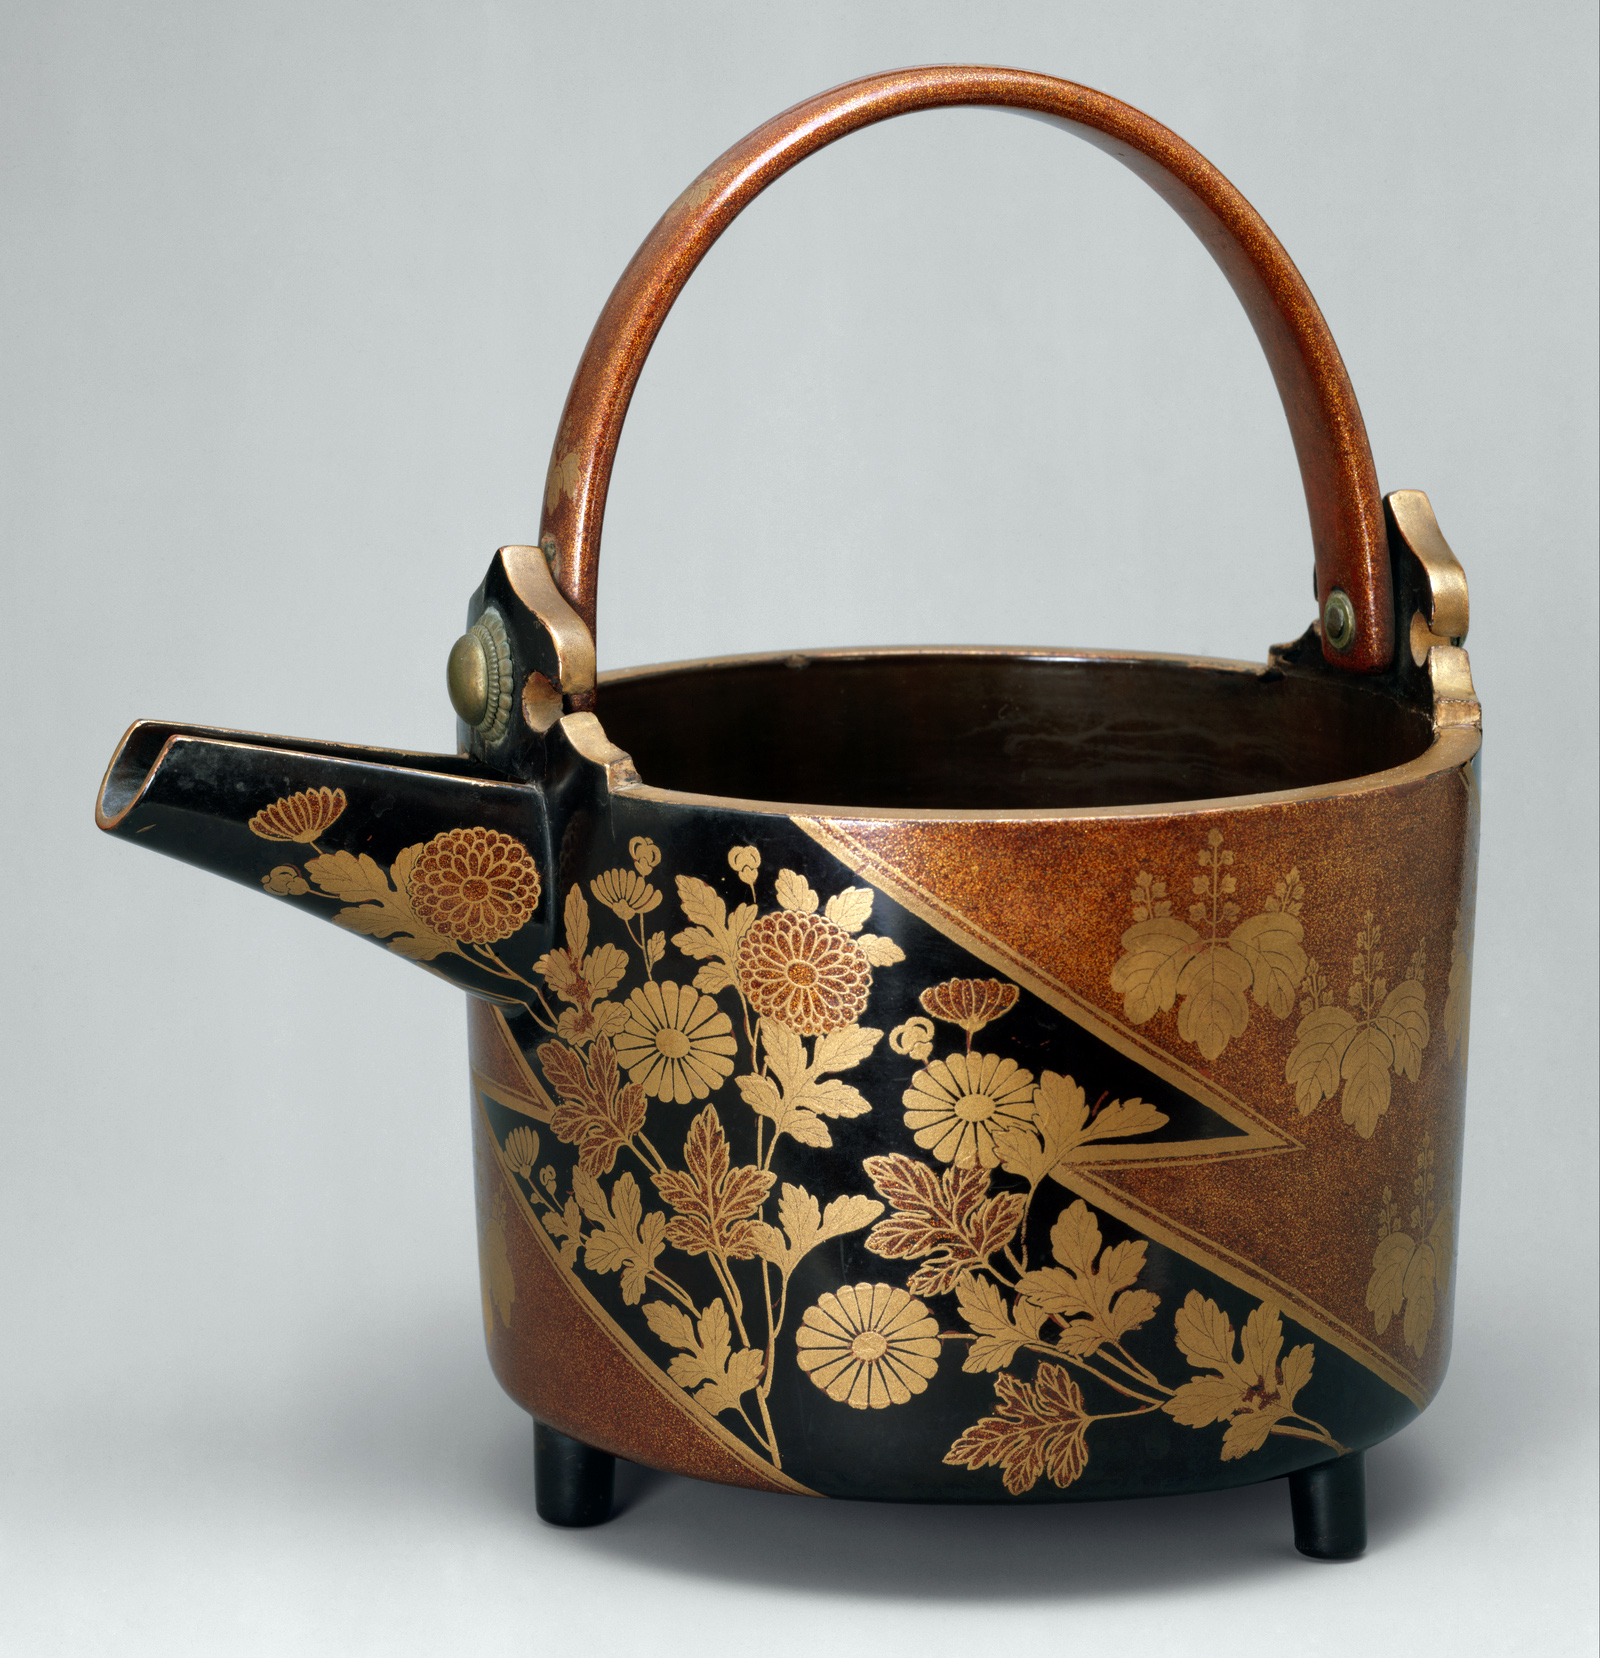 Sake Ewer (Hisage) with Chrysanthemums and Paulownia Crests in Alternating Fields, early 17th century (Momoyama period), lacquered wood with gold hiramaki-e and e-nashiji (“pear-skin picture”) on black ground, Japan, 25.4 cm x 25.7 cm (The Metropolitan Museum of Art)